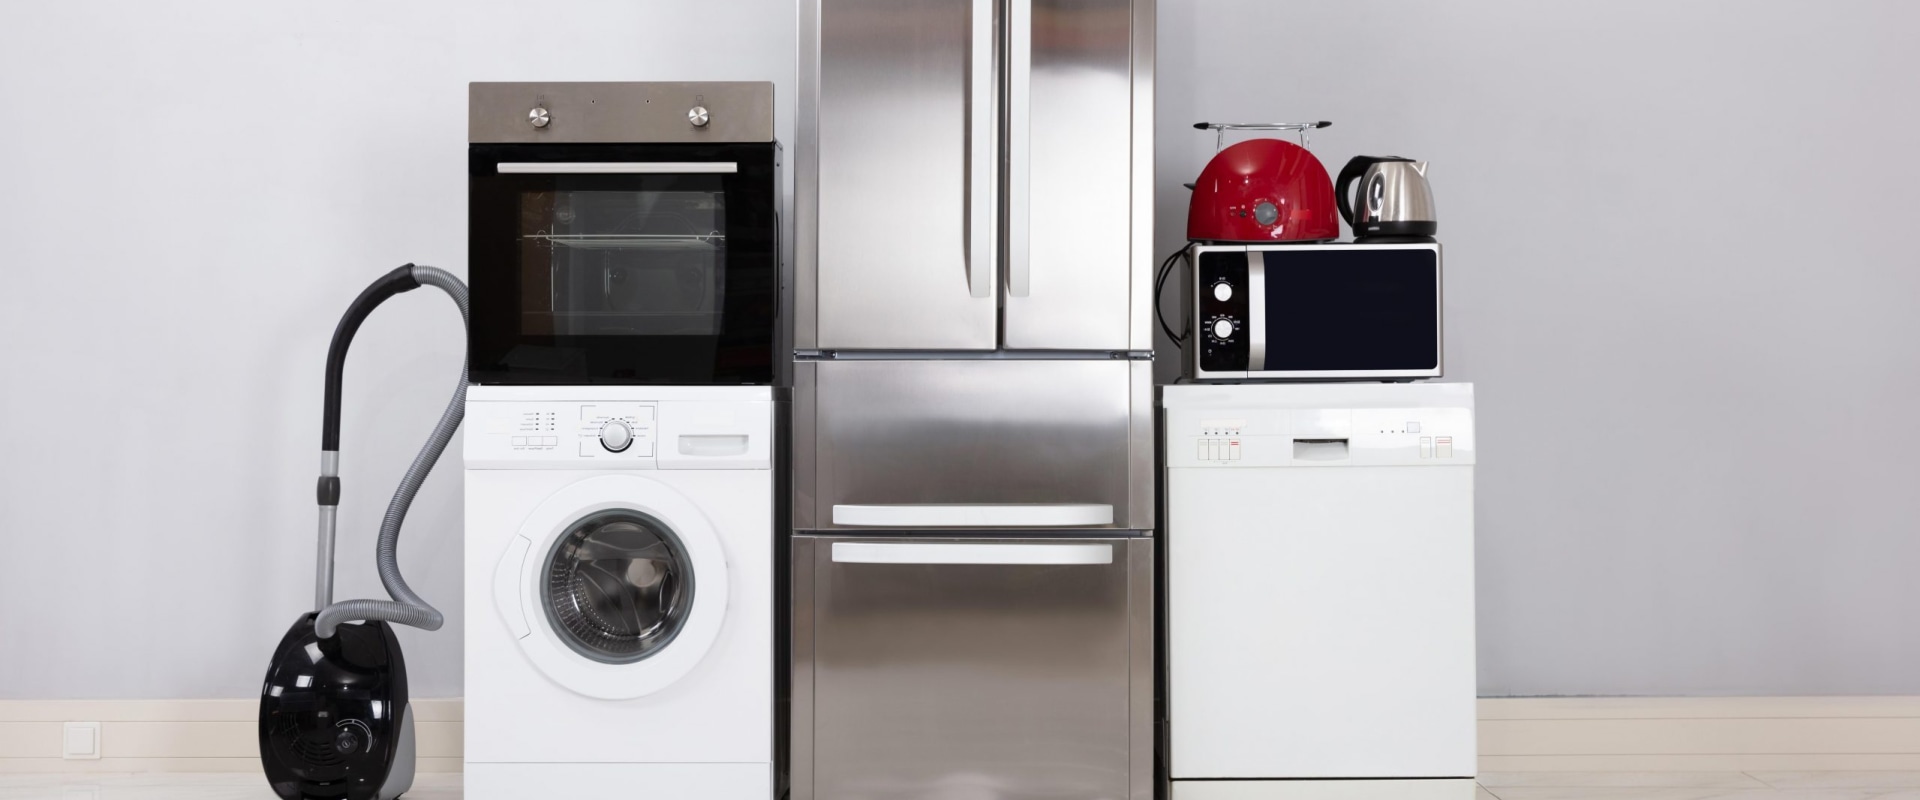 Are old appliances more reliable?